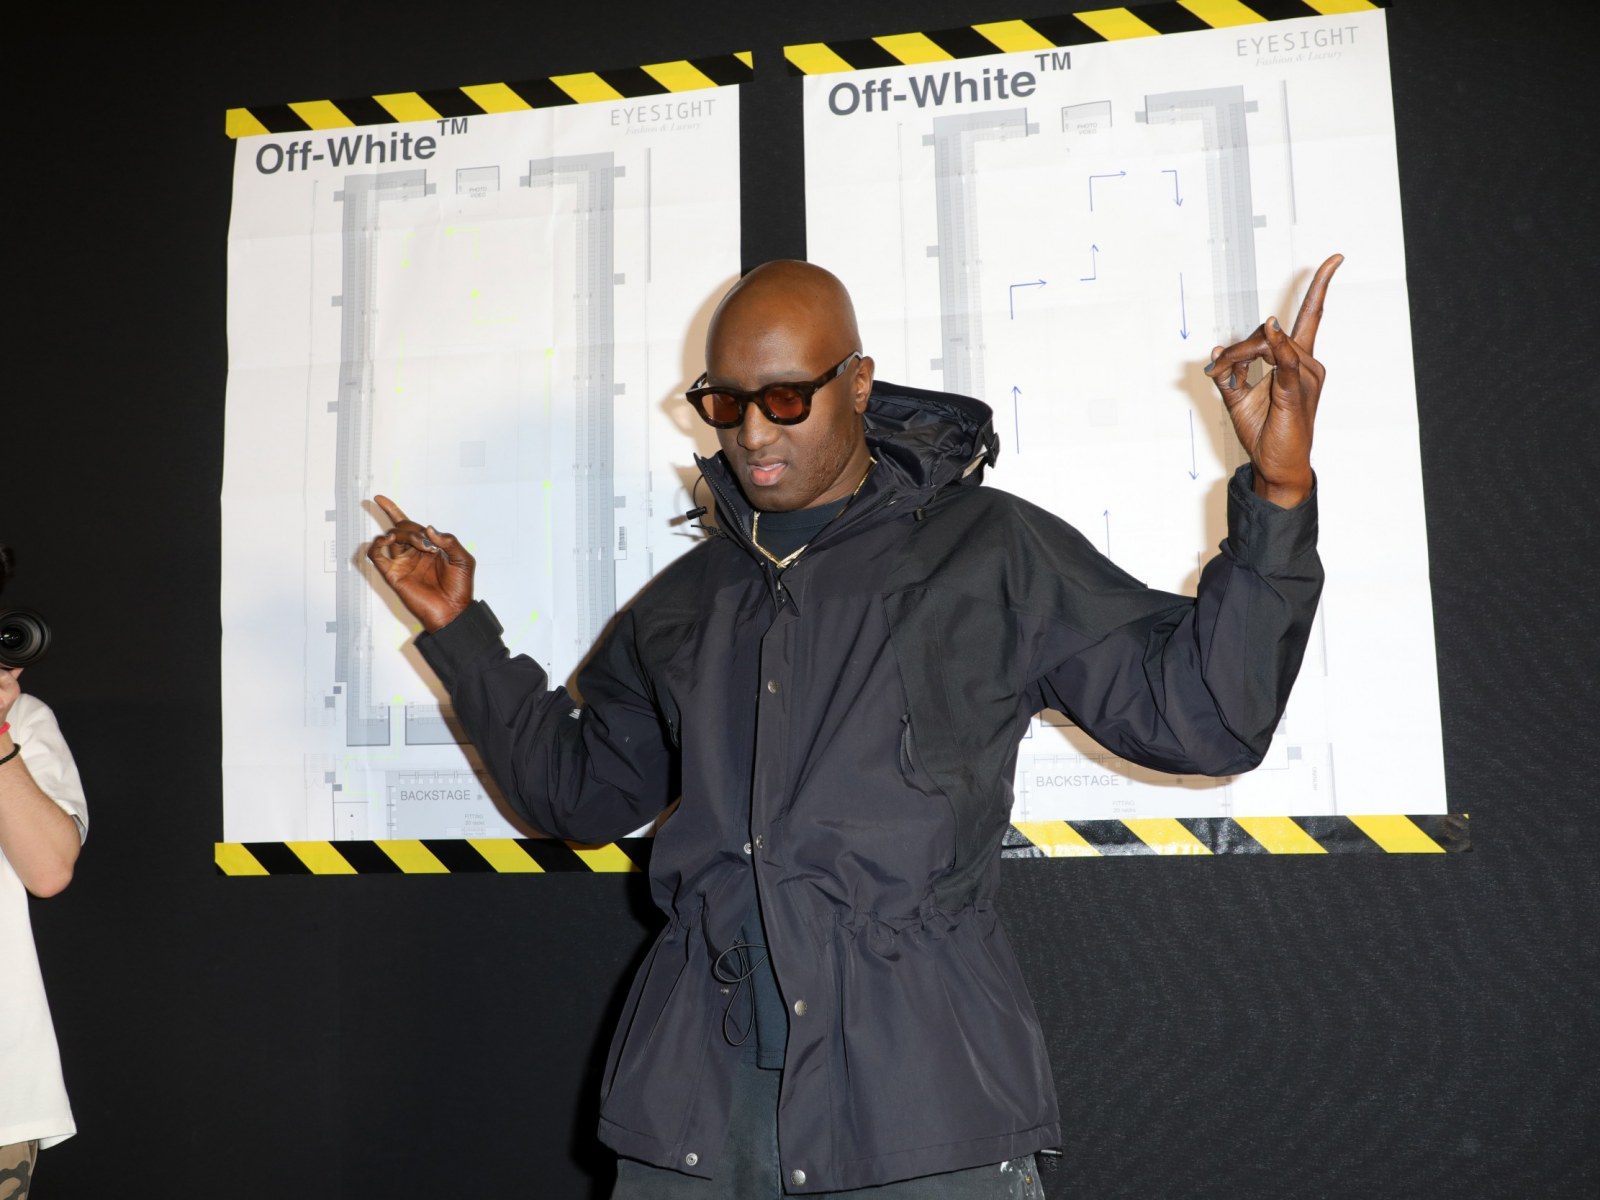 Virgil Abloh is 50 shades of grey